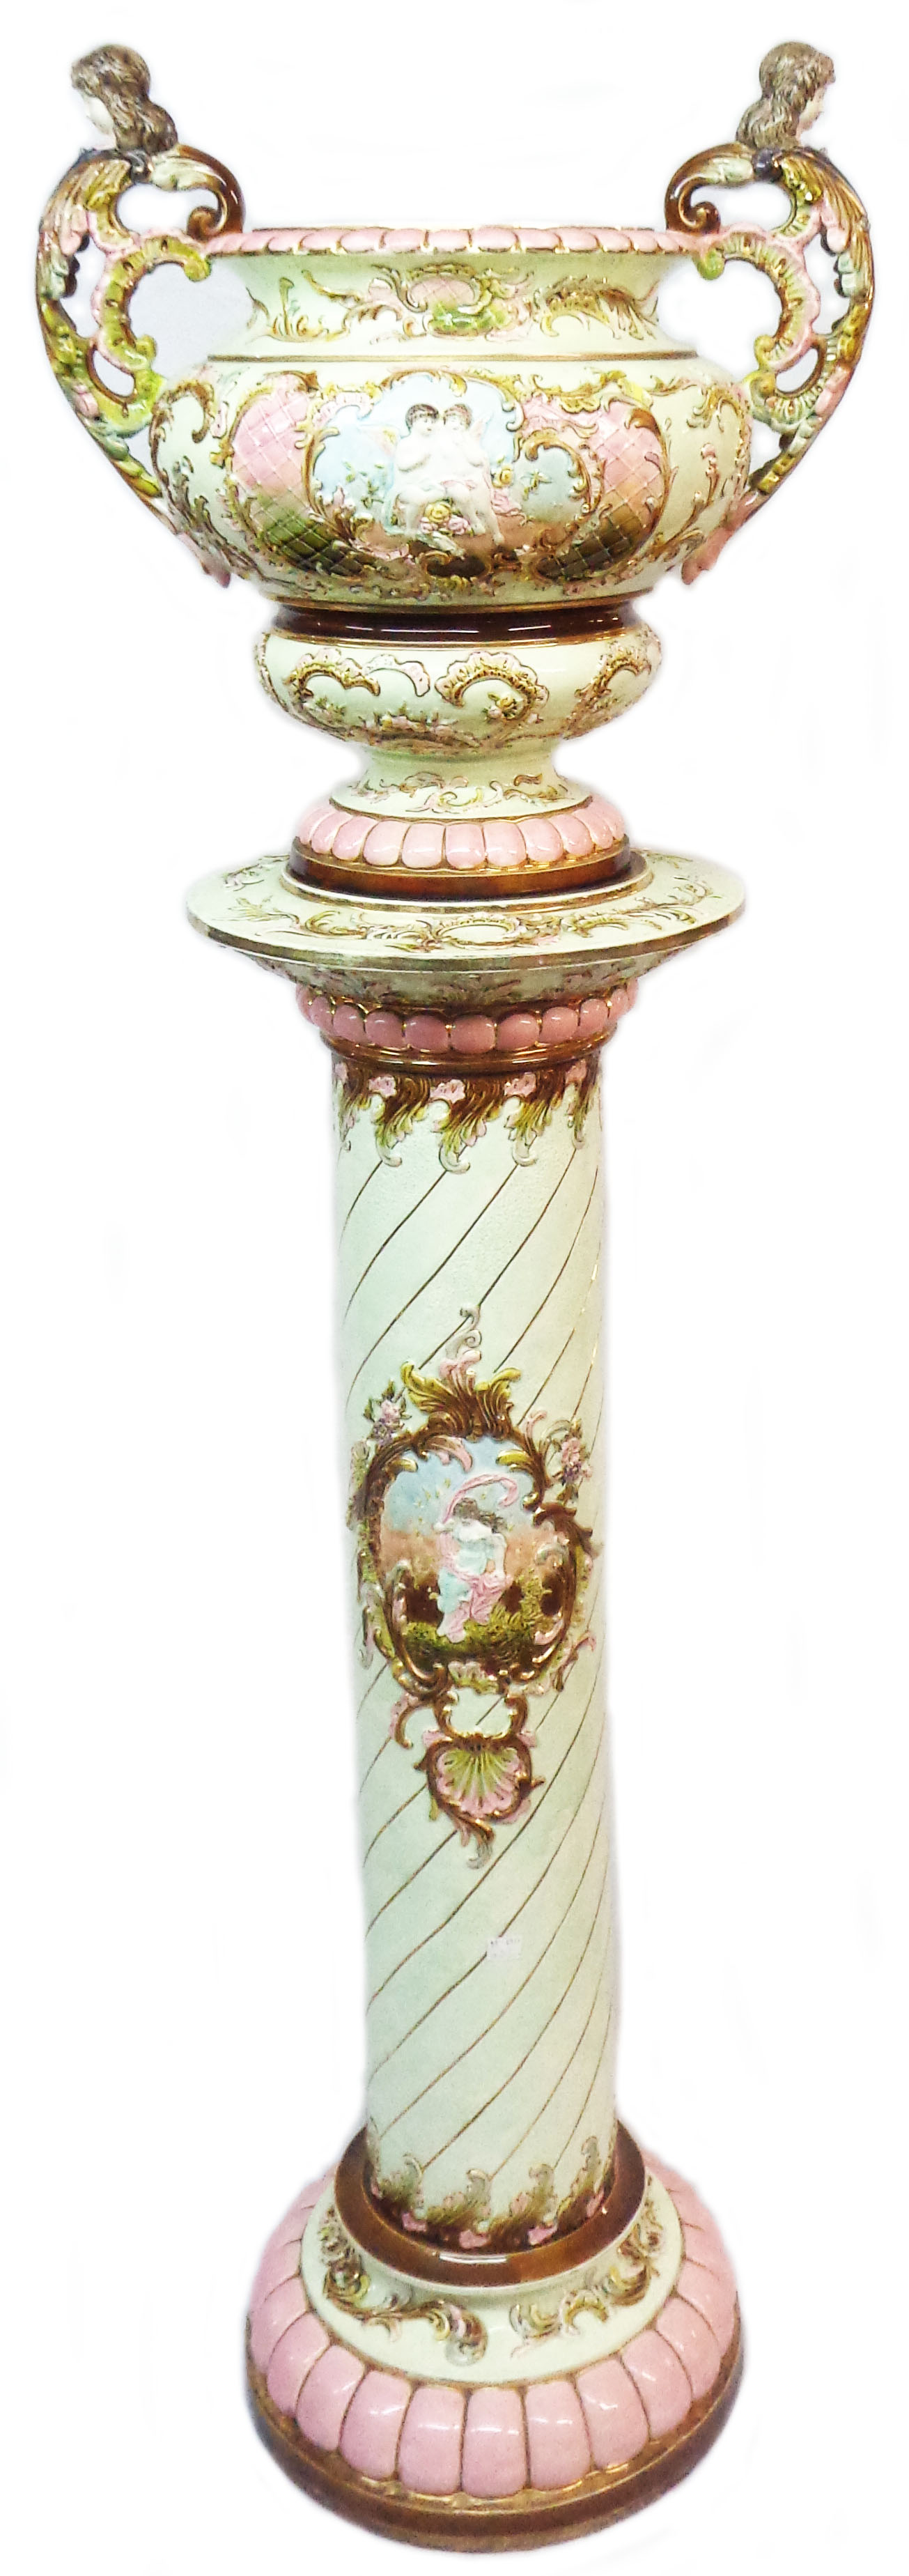 A large Austrian pottery majolica jardinière and stand, the jardinière of urn form with caryatid